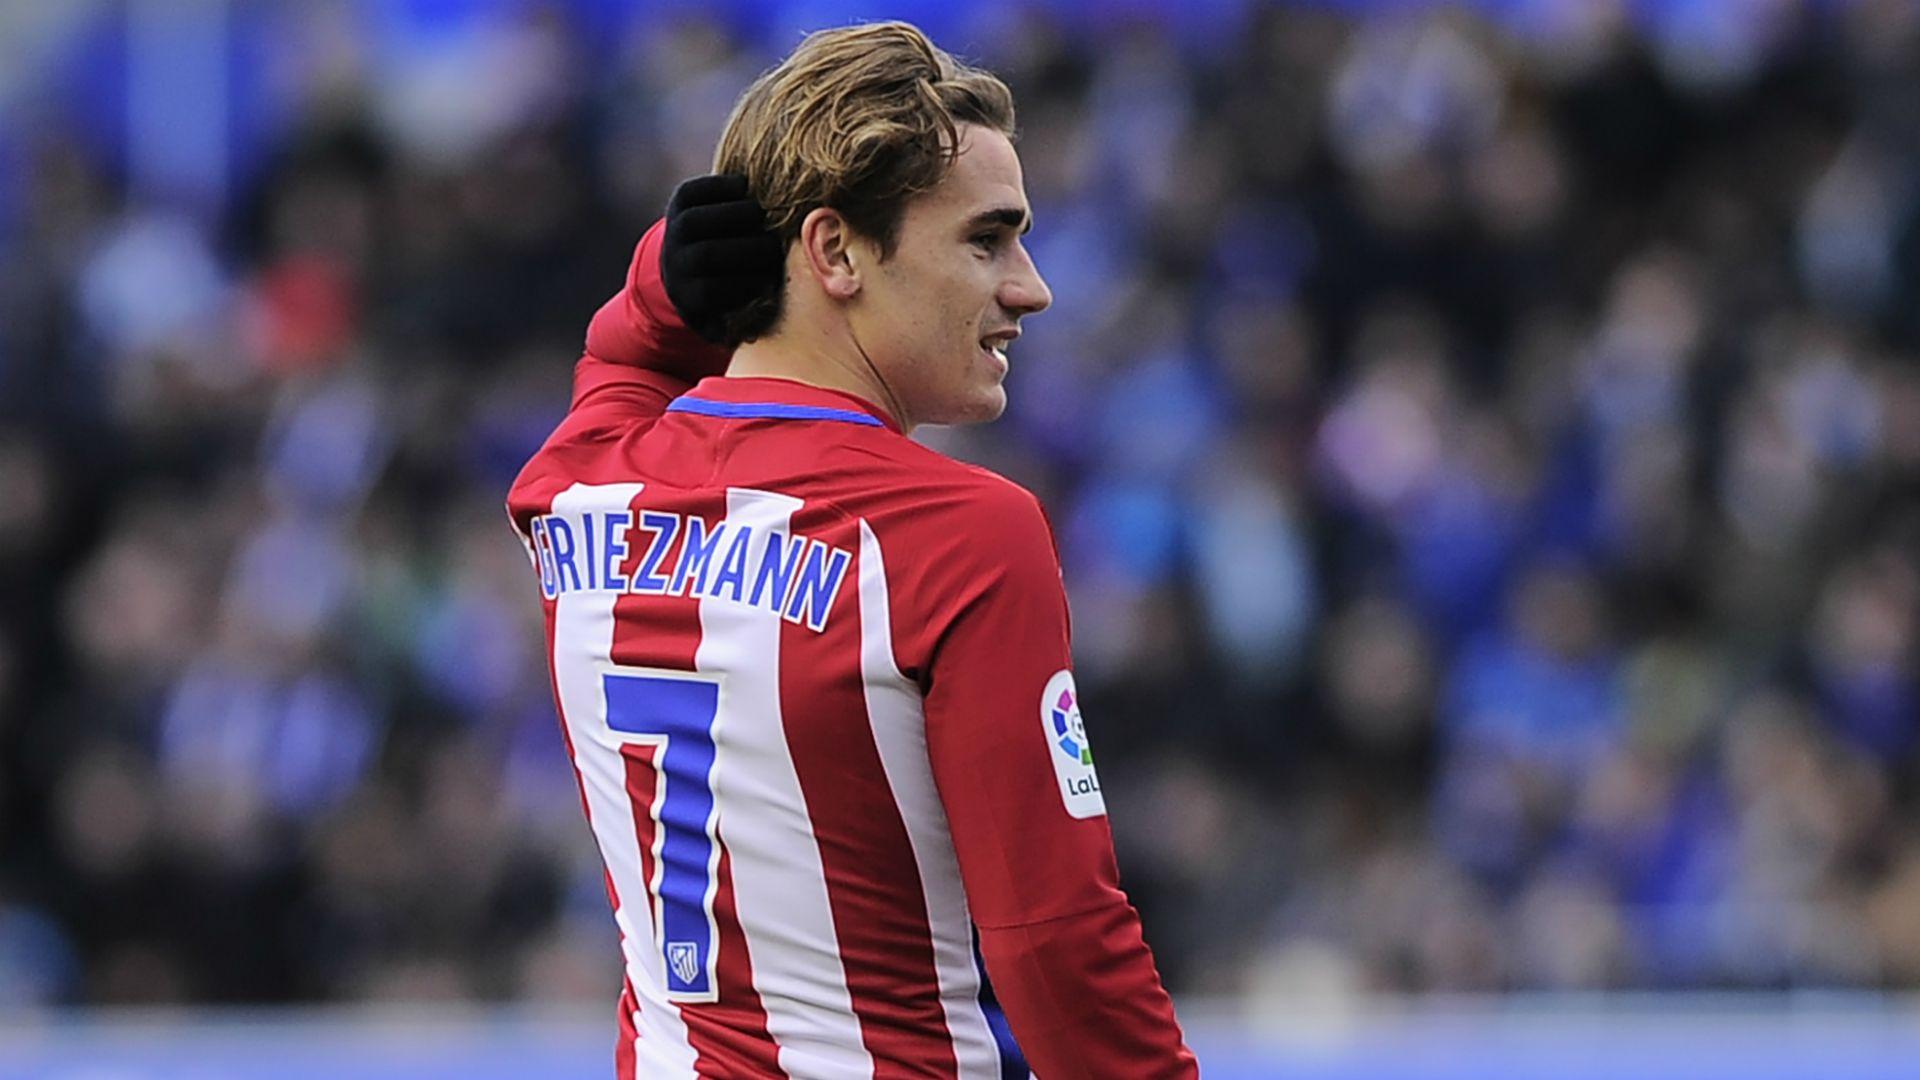 Griezmann at Man Utd in Beckham's number seven jersey would be